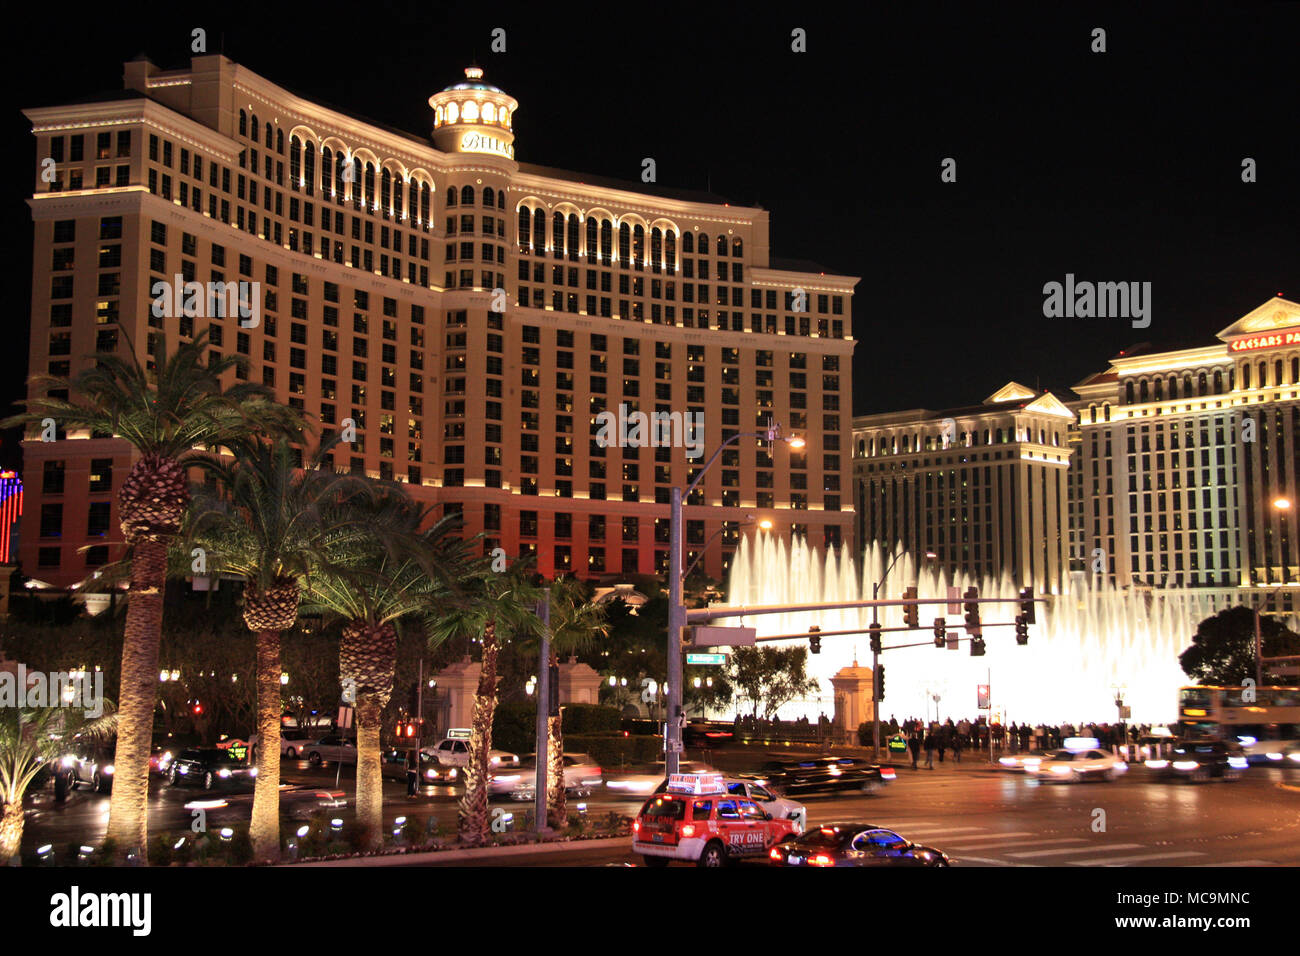 The Bellagio Hotel Resort and Casino and it's famous dancing water fountains as seen from across the Las Vegas Boulevard, Las Vegas, NV, USA Stock Photo